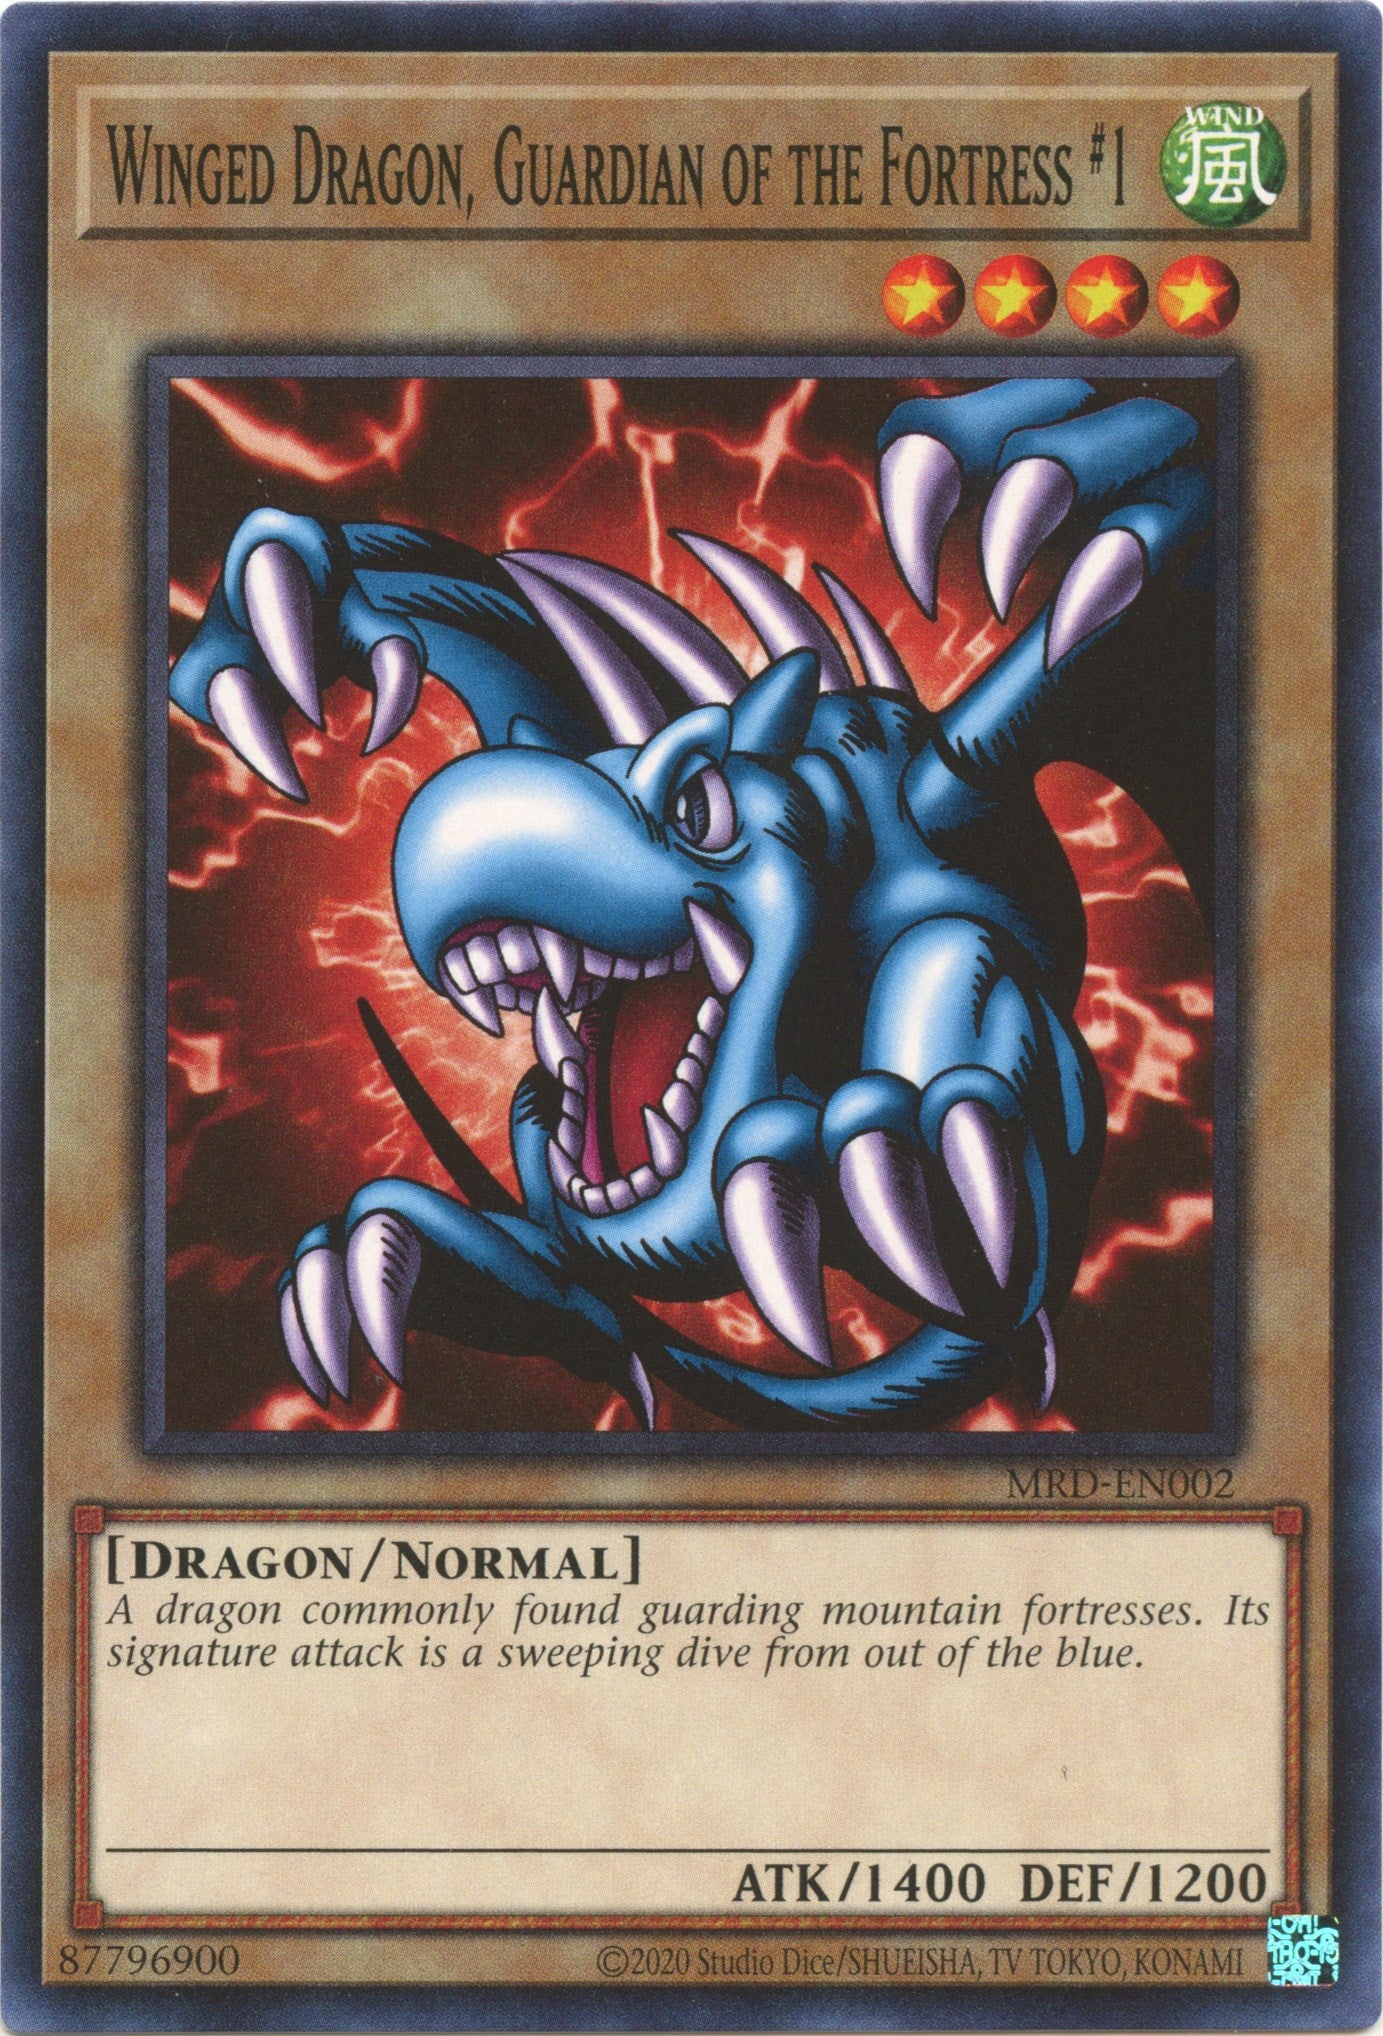 Winged Dragon, Guardian of the Fortress #1 (25th Anniversary) [MRD-EN002] Common | Amazing Games TCG